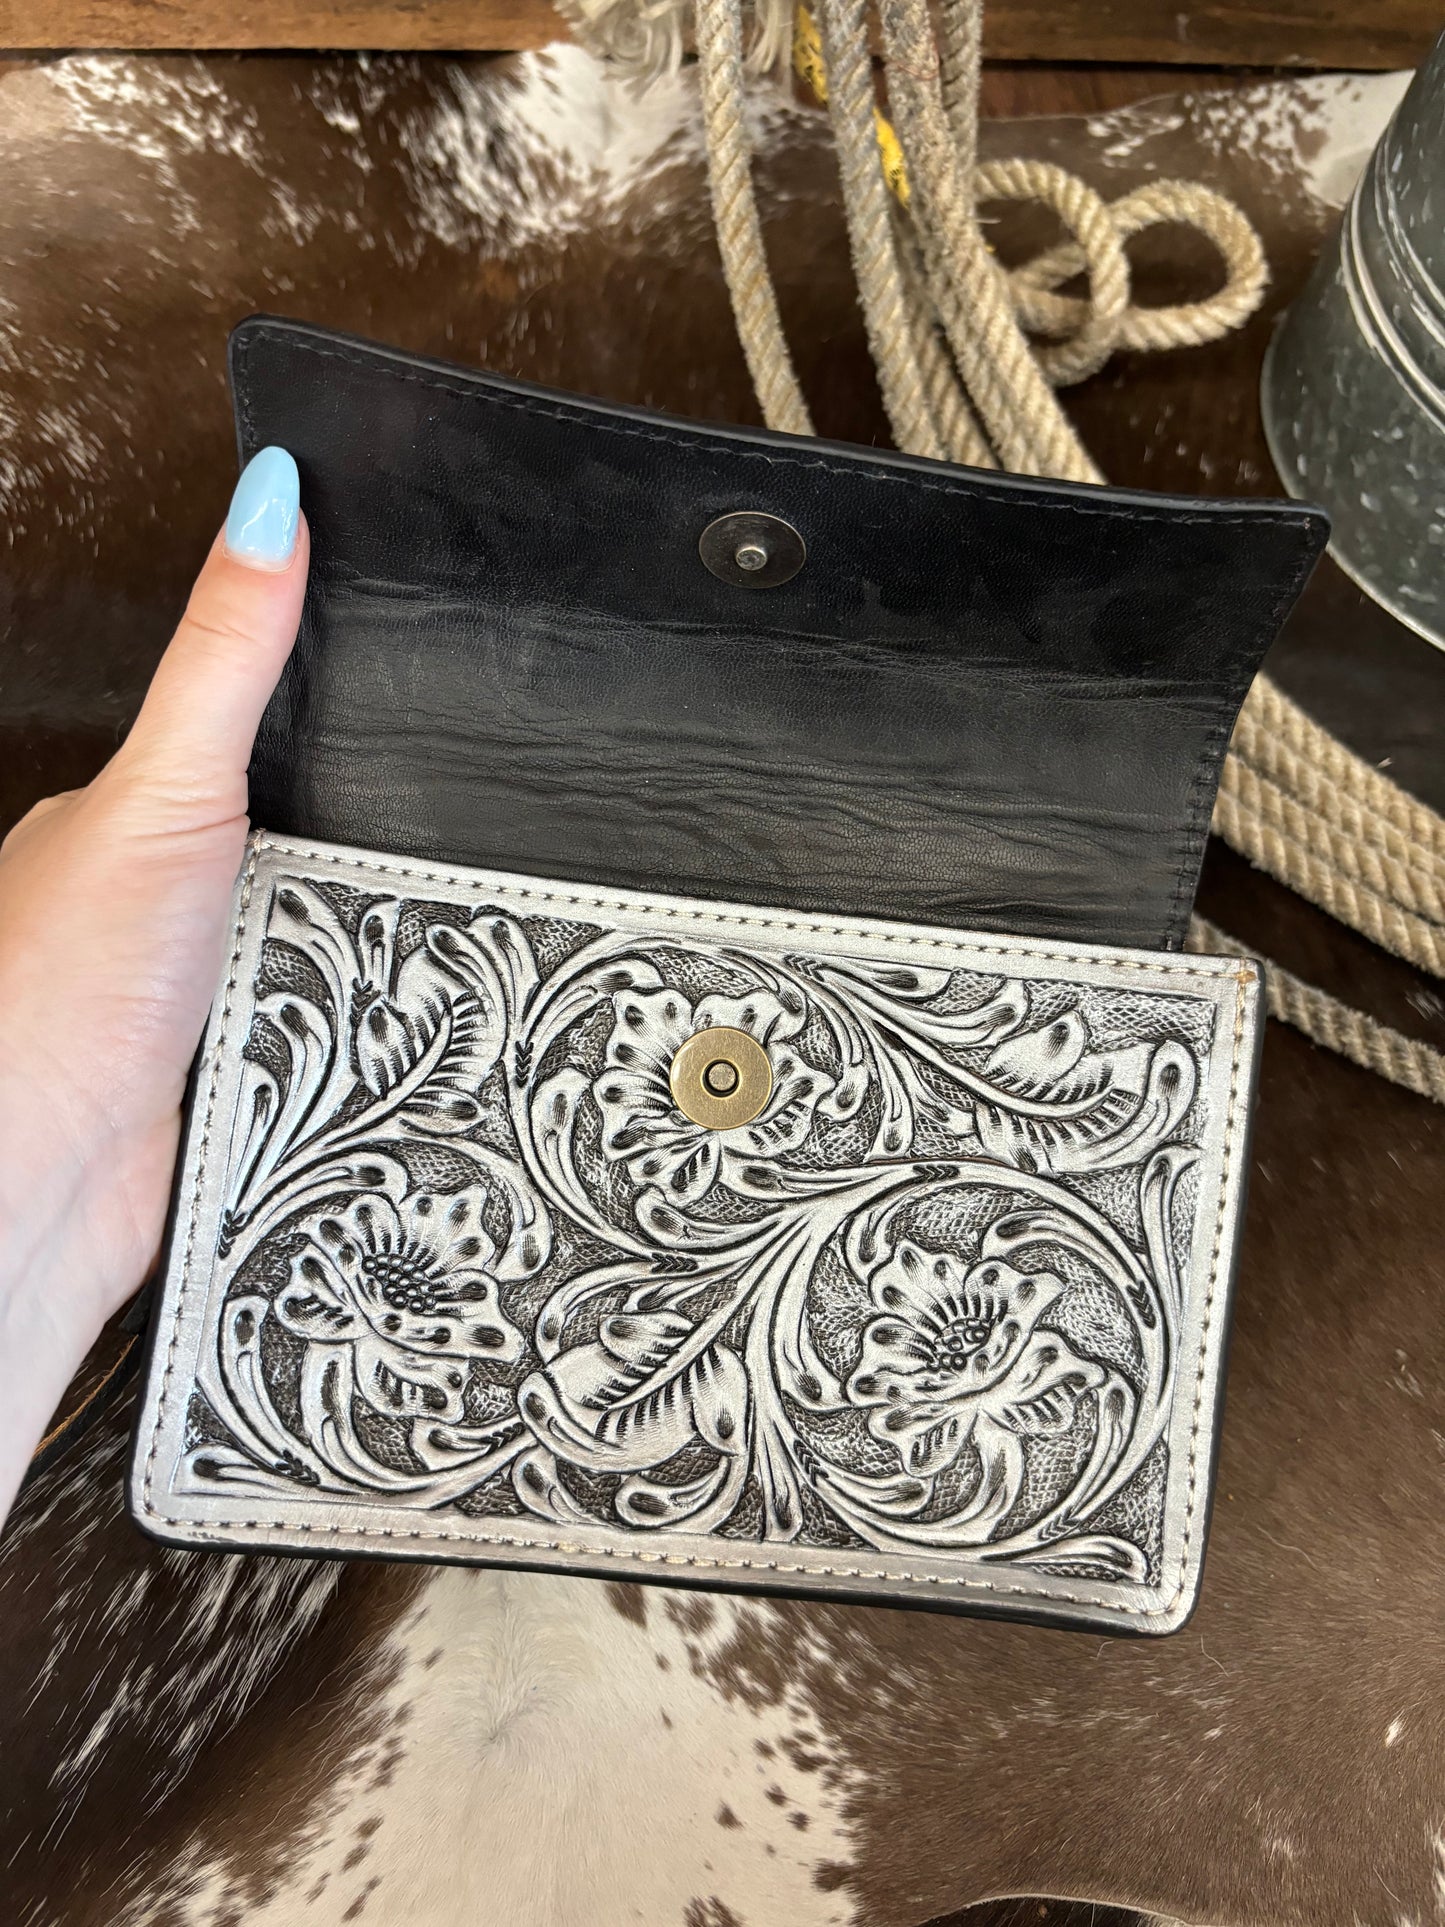 The Essentials Only Tooled Leather Crossbody